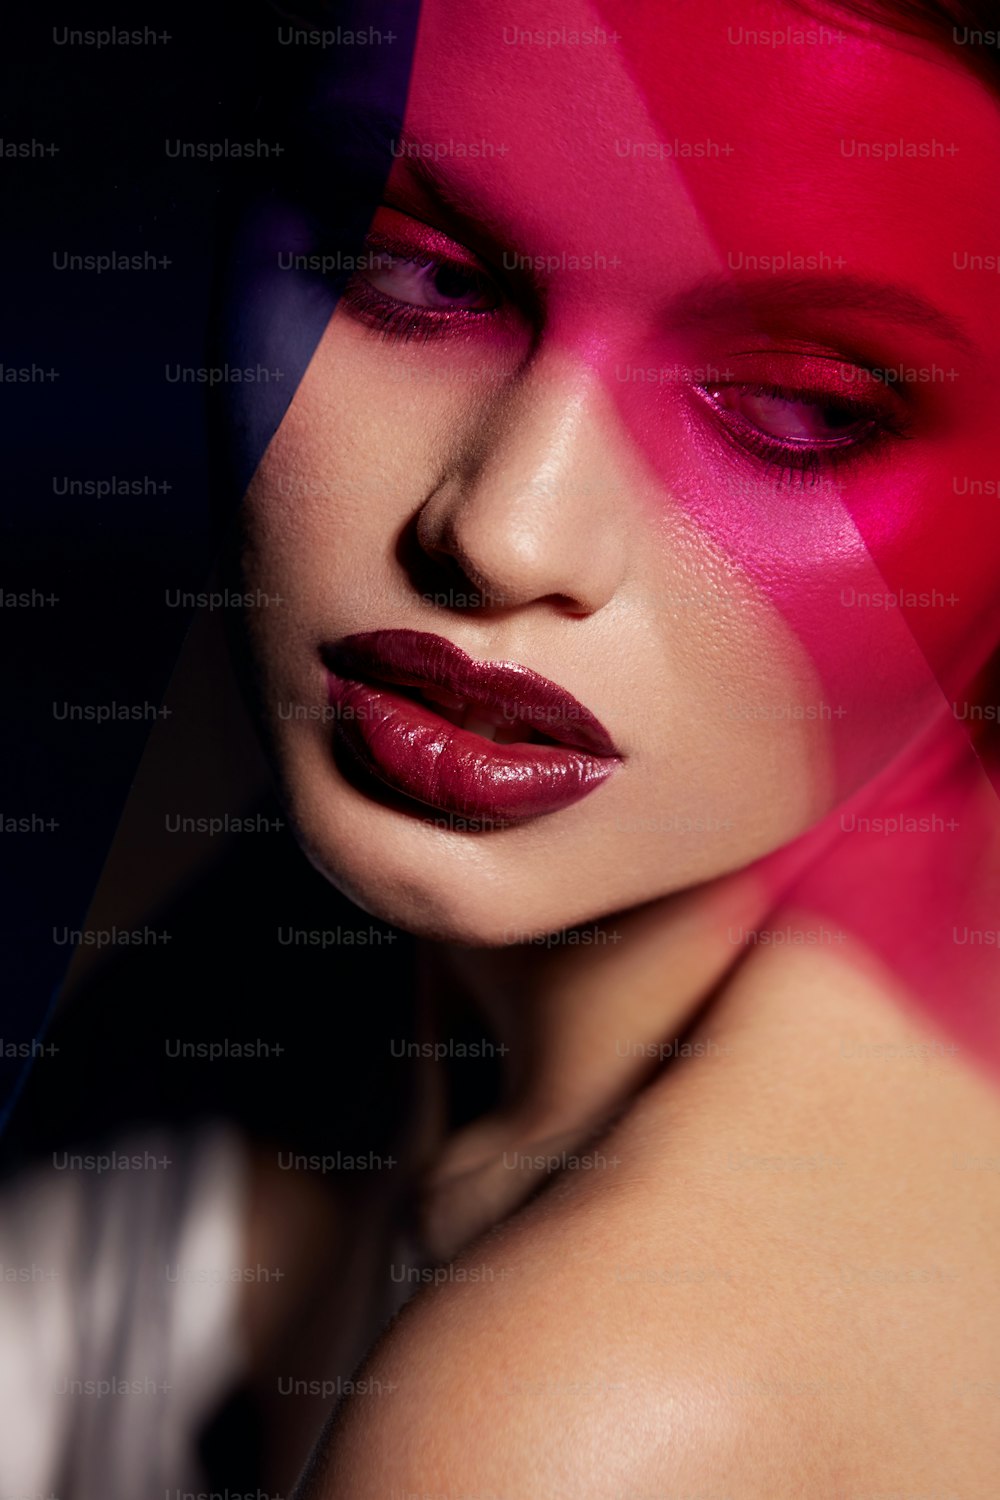 Beauty face makeup. Fashion portrait of girl model with lipstick under color. Closeup of glamorous girl with sexy dark red lips make-up and glowing skin under pink and purple colors. High quality